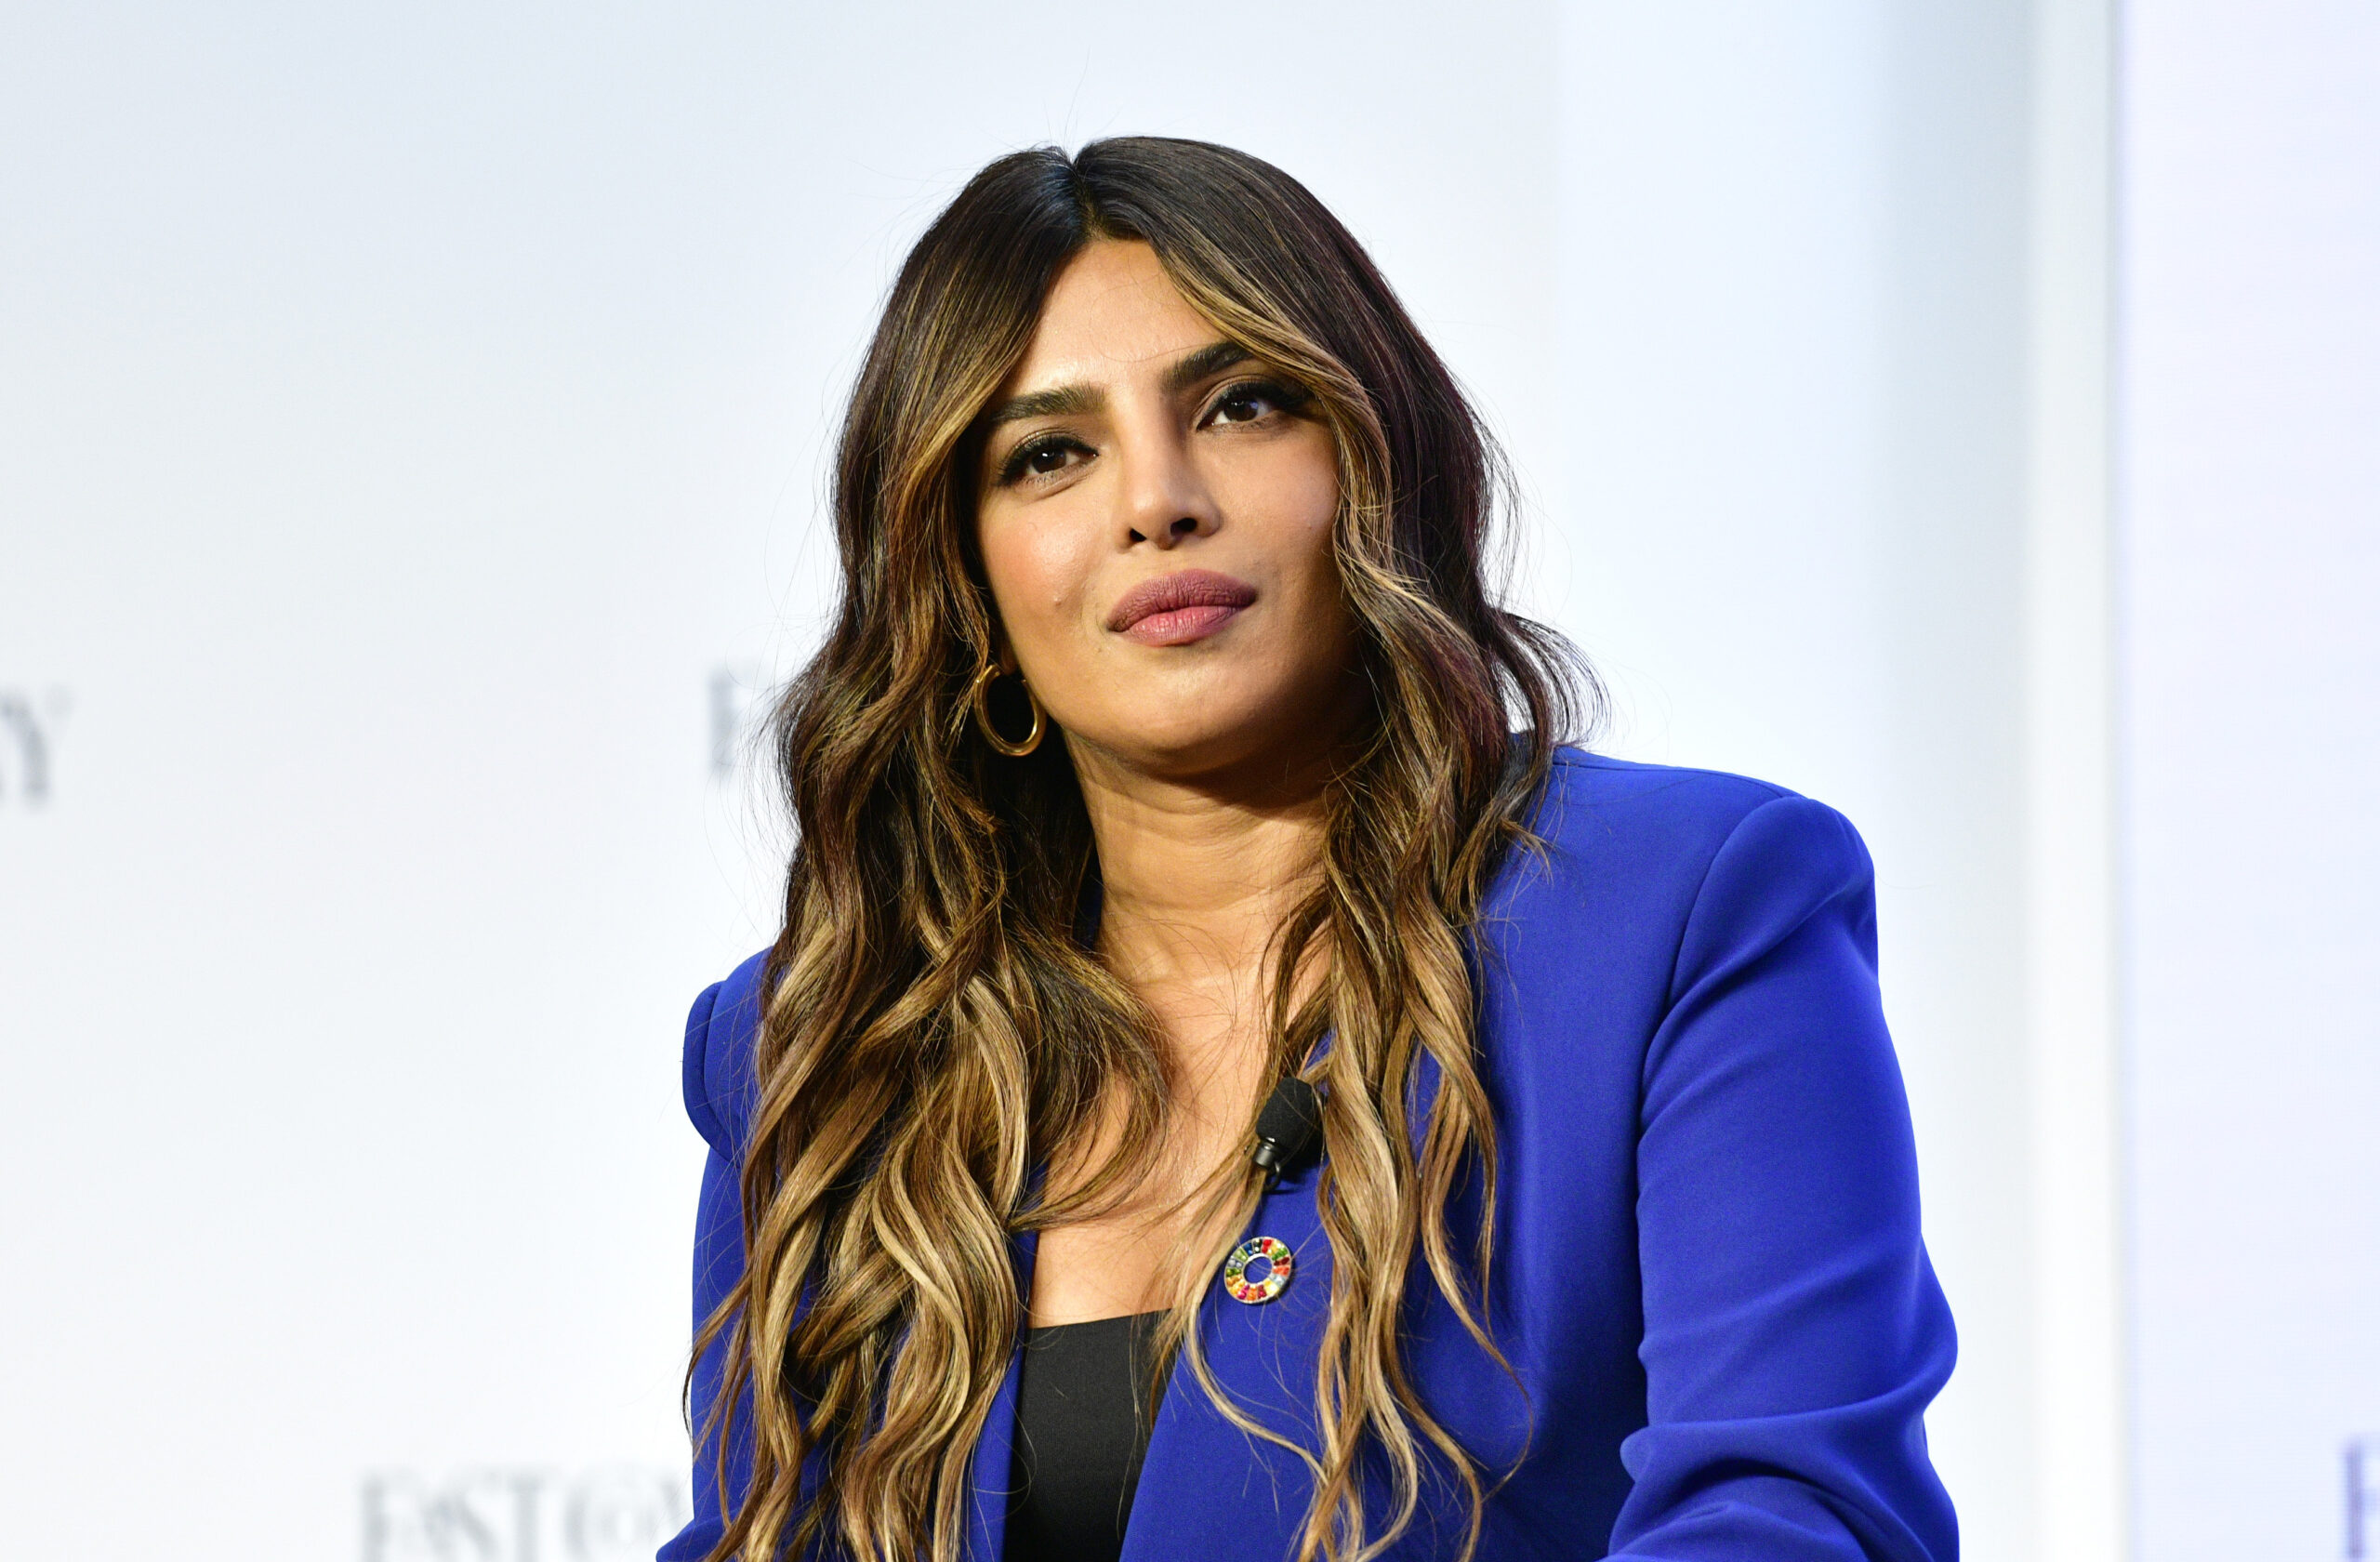 Priyanka Chopra Gushes About Egg Freezing While Heading Down ‘Ambitious Warpath’ Of Her Career: ‘Best Gift You’ll Give Yourself’